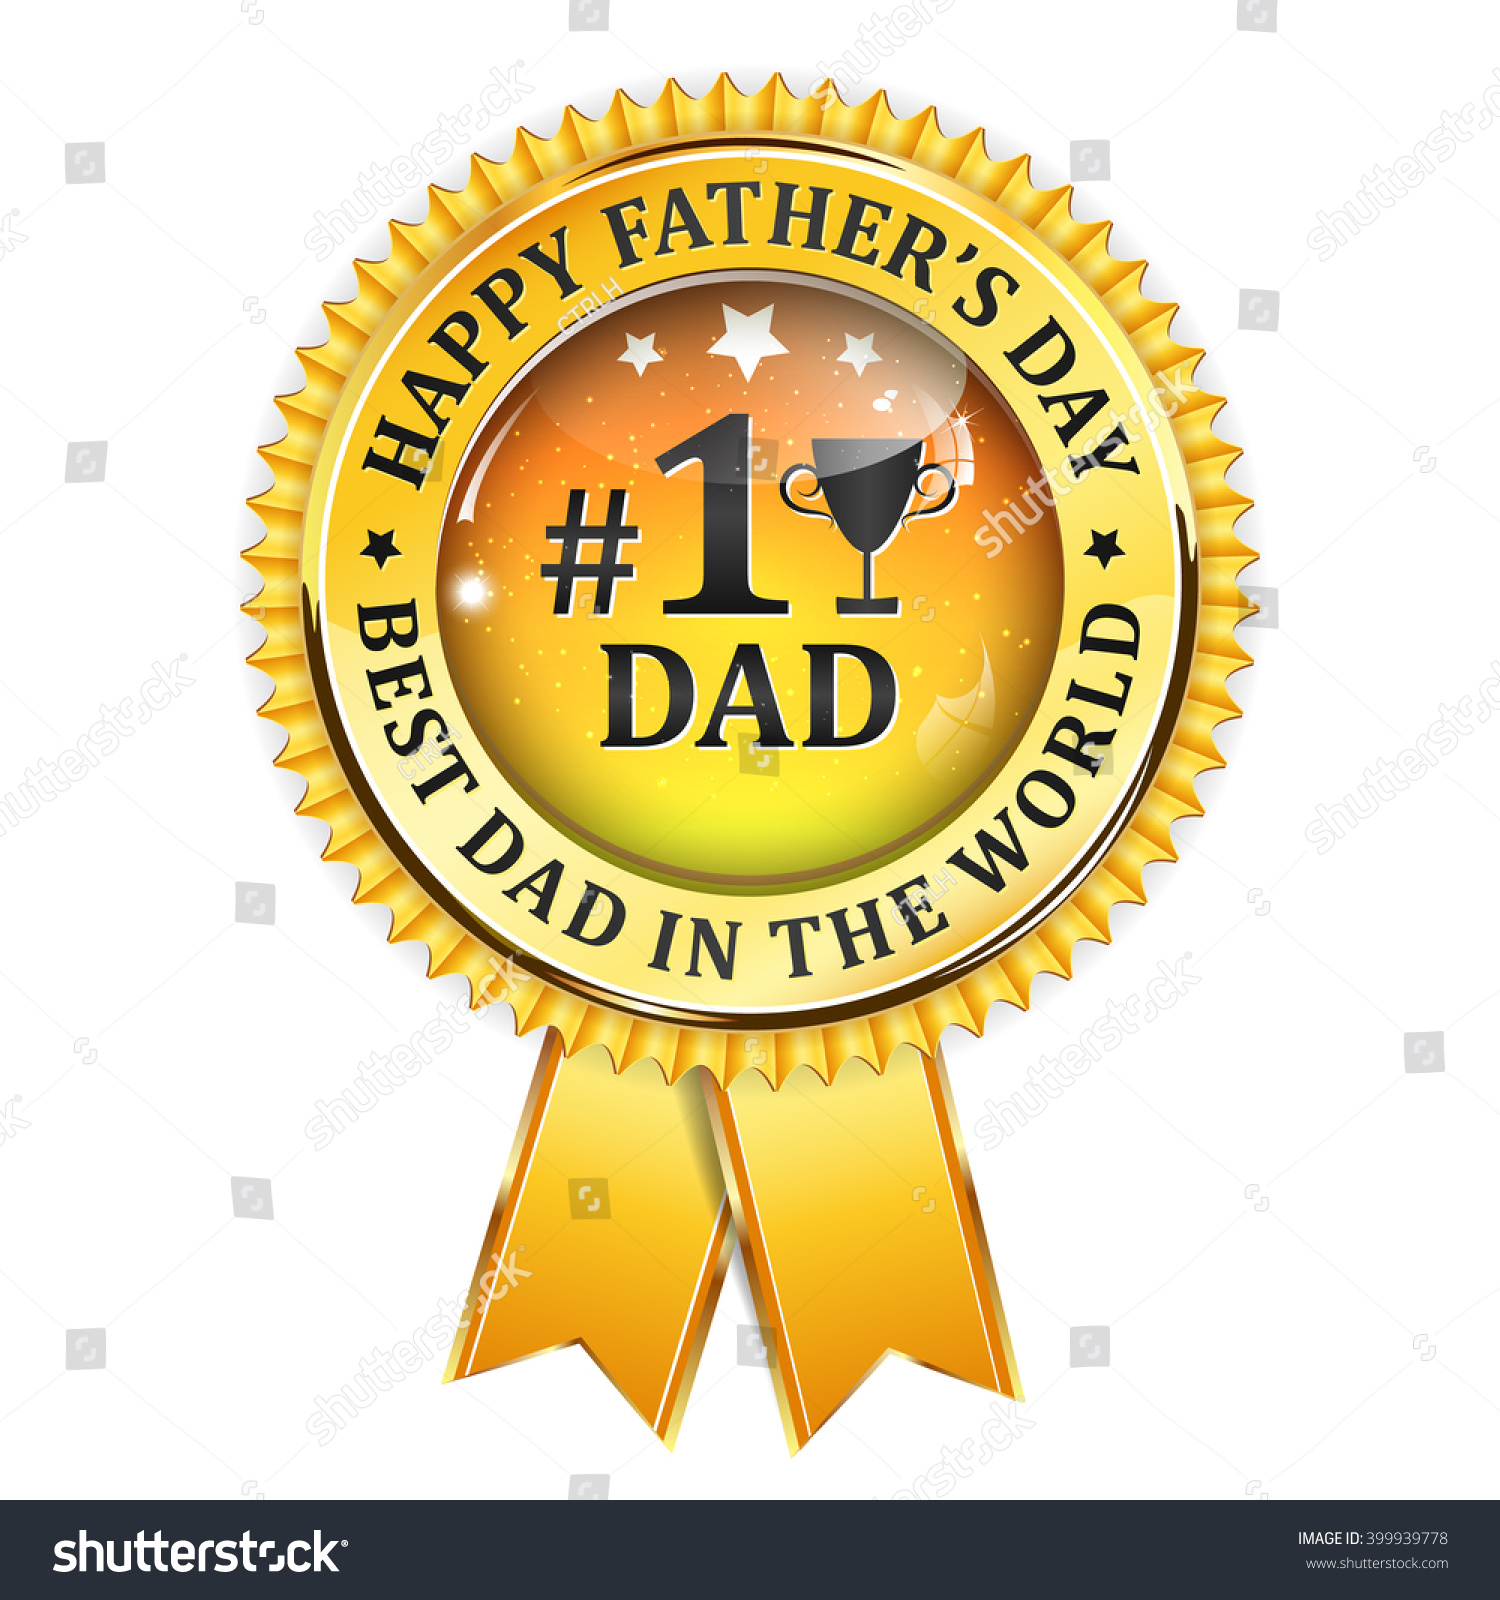 Happy Fathers Day No 1 Dad Stock Vector 399939778 - Shutterstock